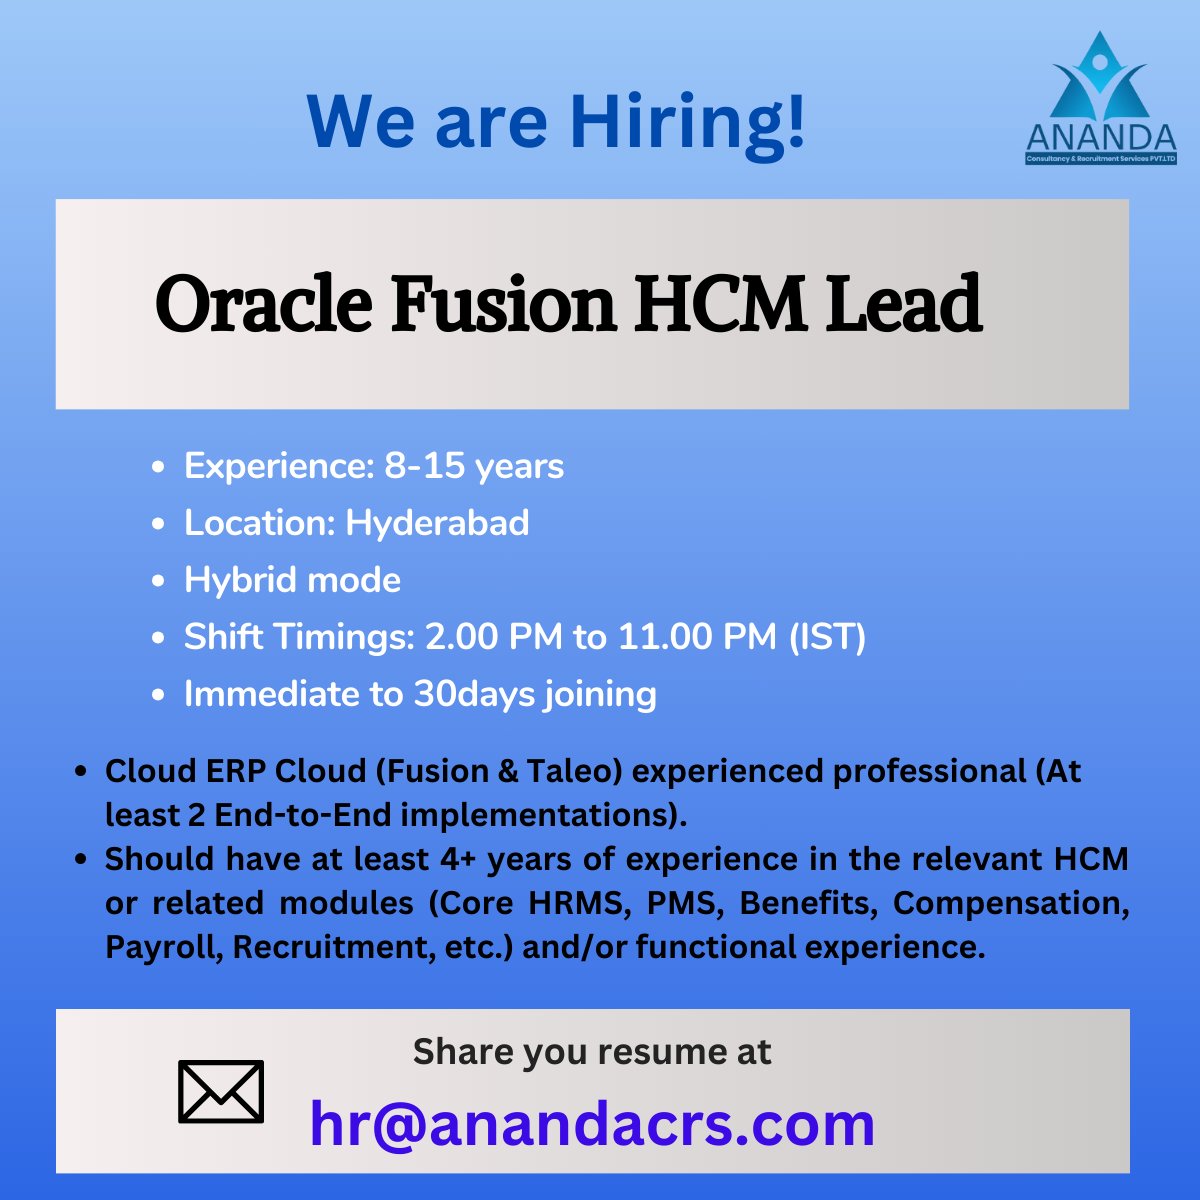 Oracle Fusion HCM Lead

Drop your resume at hr@anandacrs.com

#oraclefusion #oraclefusioncloud #oraclehcm #fusioncloud #oracledeveloper #oraclejobs #oraclehcmcloud #implementation #hcm #hyderabad #hyderabadjobs #hyderabadhiring #hiring #softwaredeveloperjobs #hybrid #softwarejobs